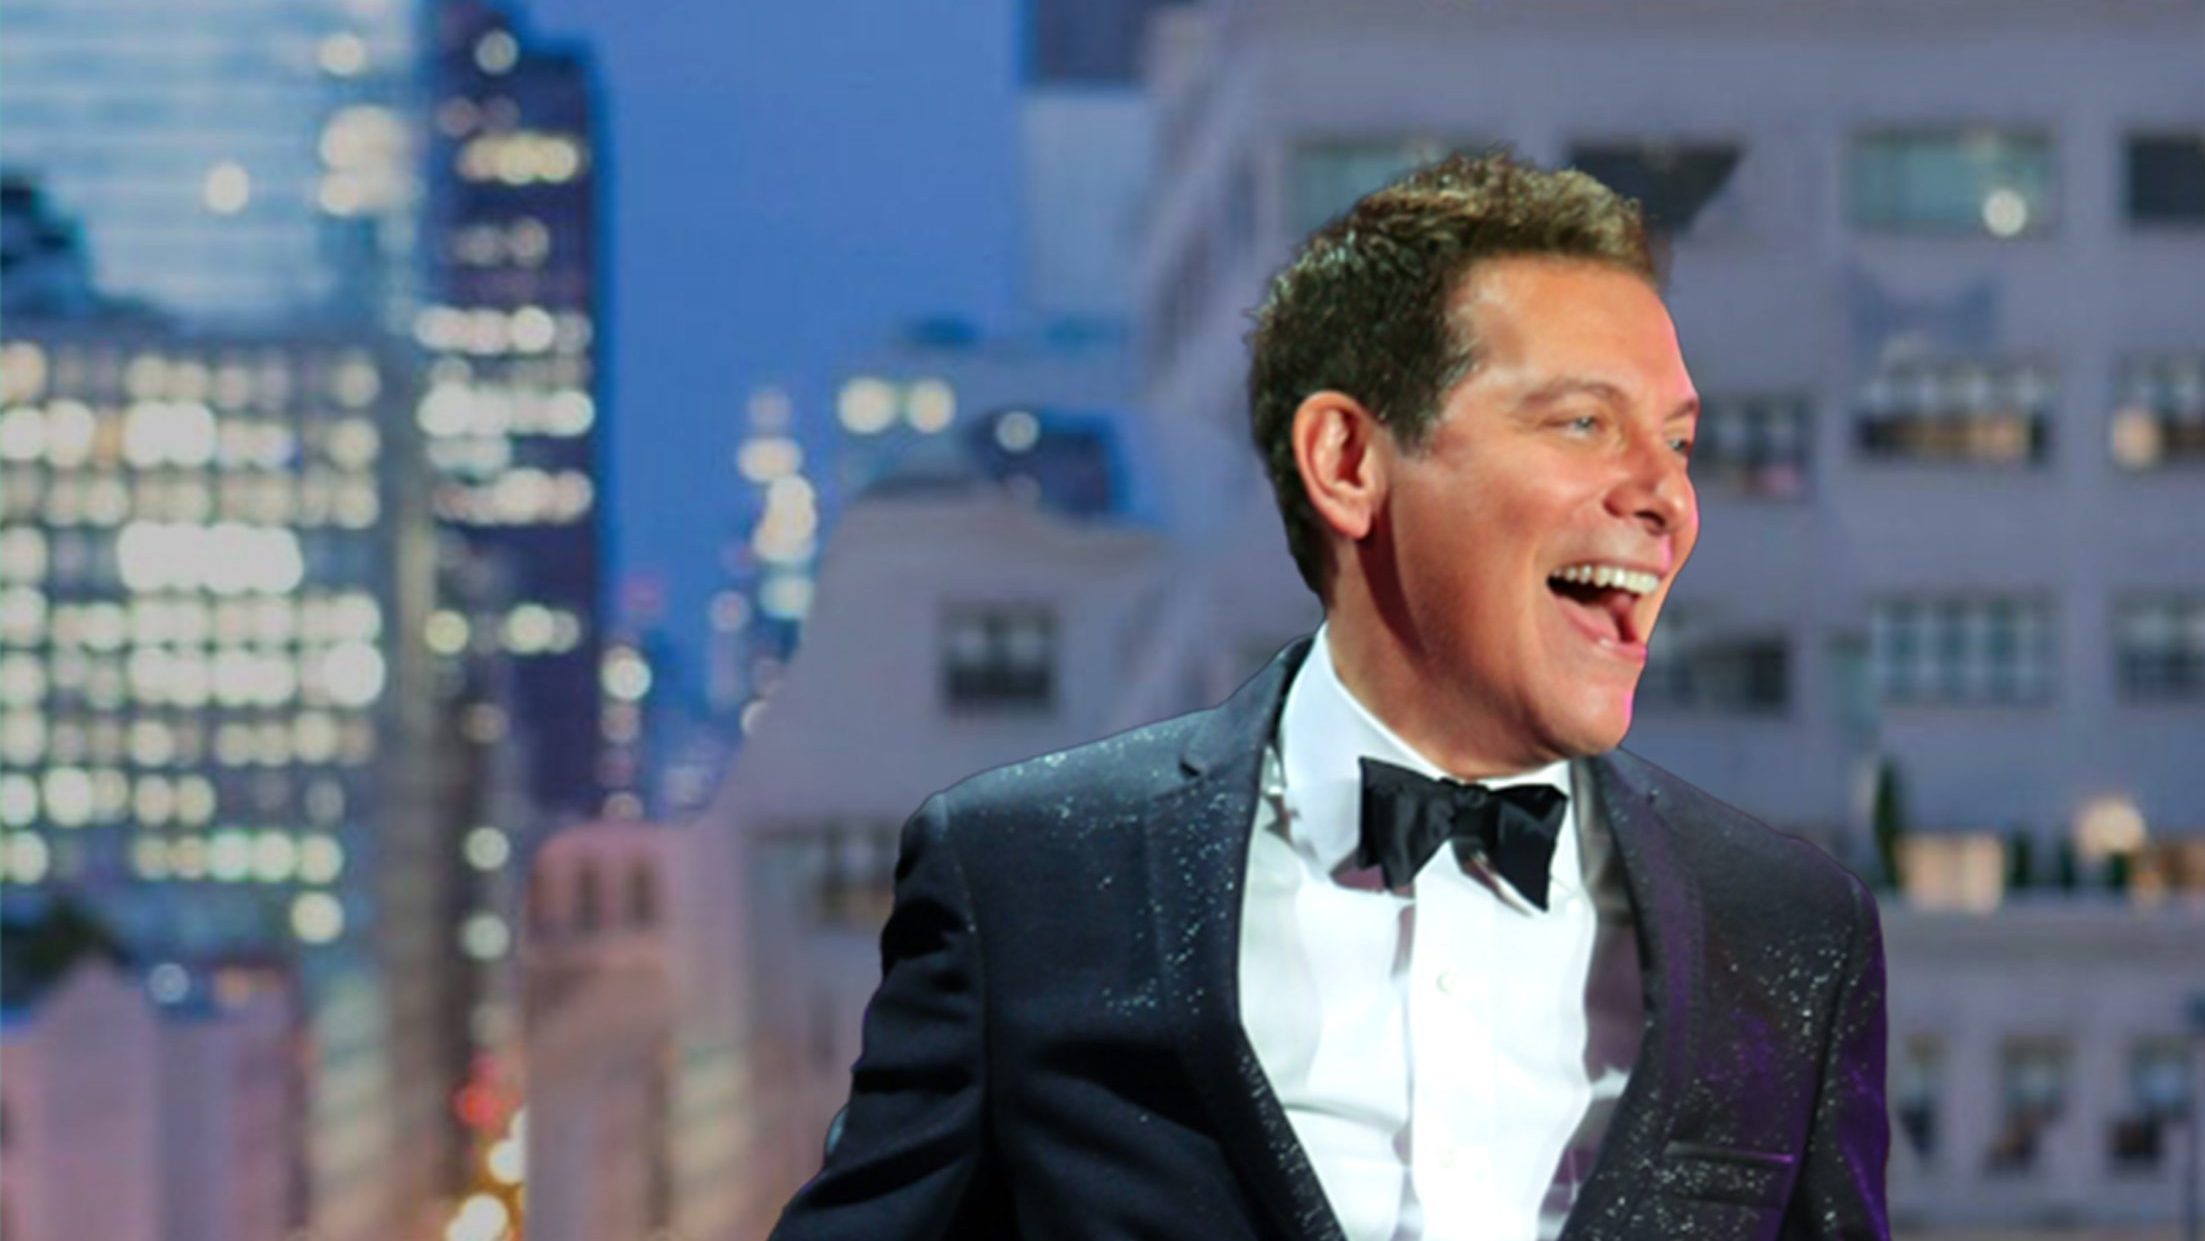 Michael Feinstein in a black tuxedo and bow tie laughing joyously, holding a microphone with a vibrant cityscape at night in the background.